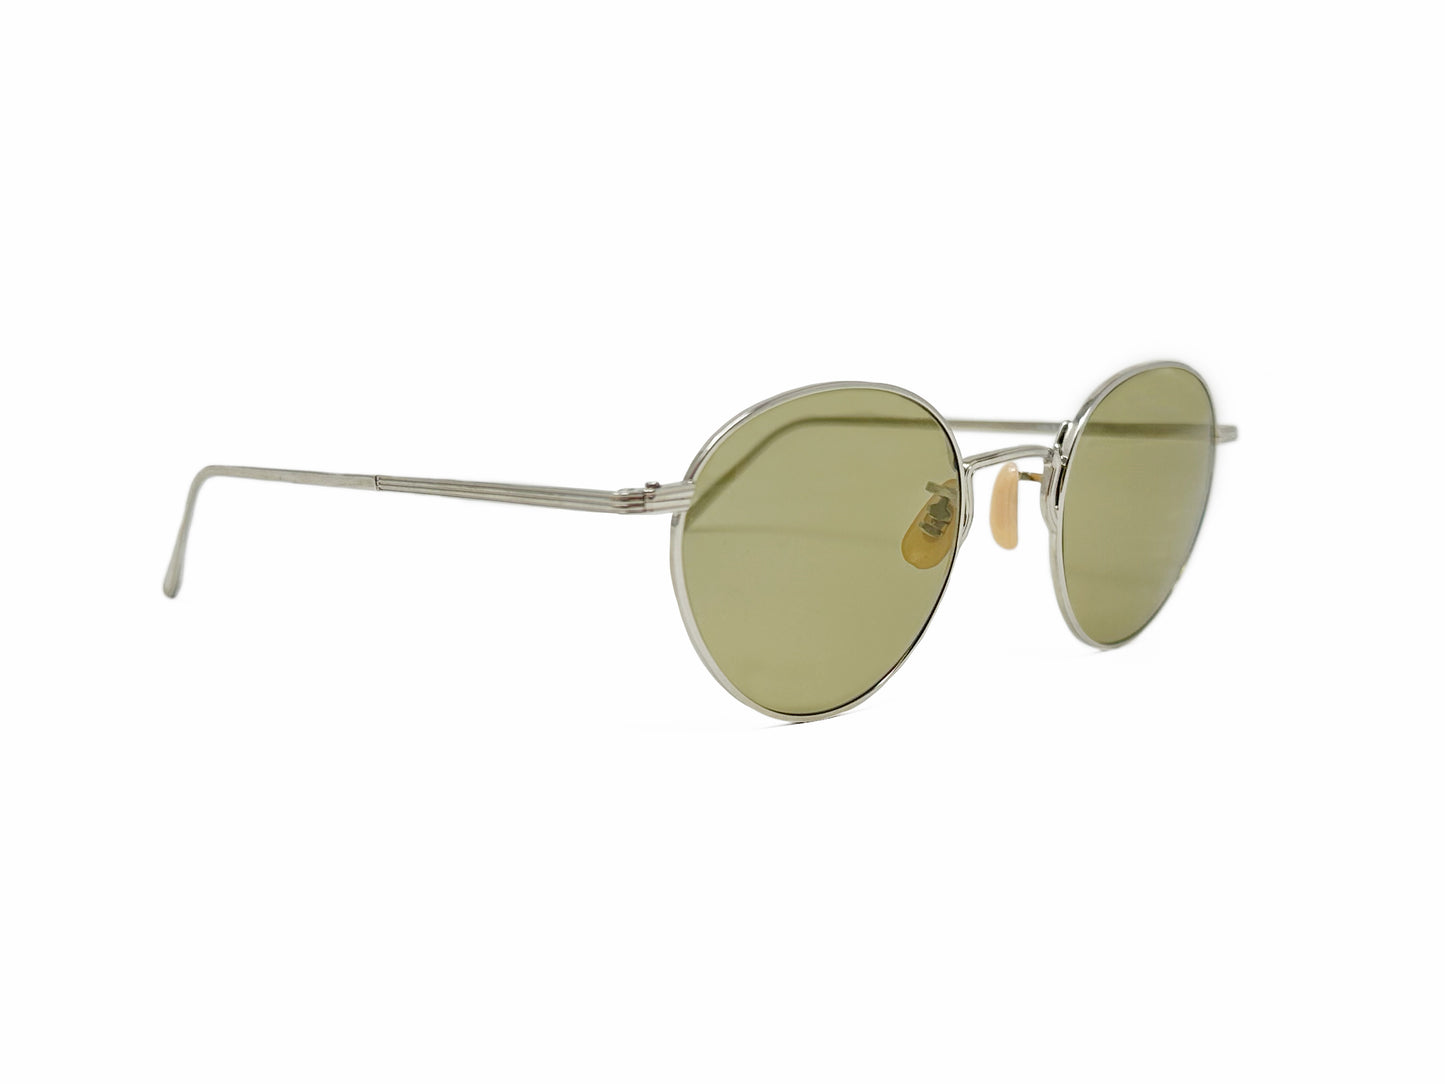 Kala Eyewear rounded, metal sunglass. Model: Edison. Color: SLV - Silver with green lenses. Side view.